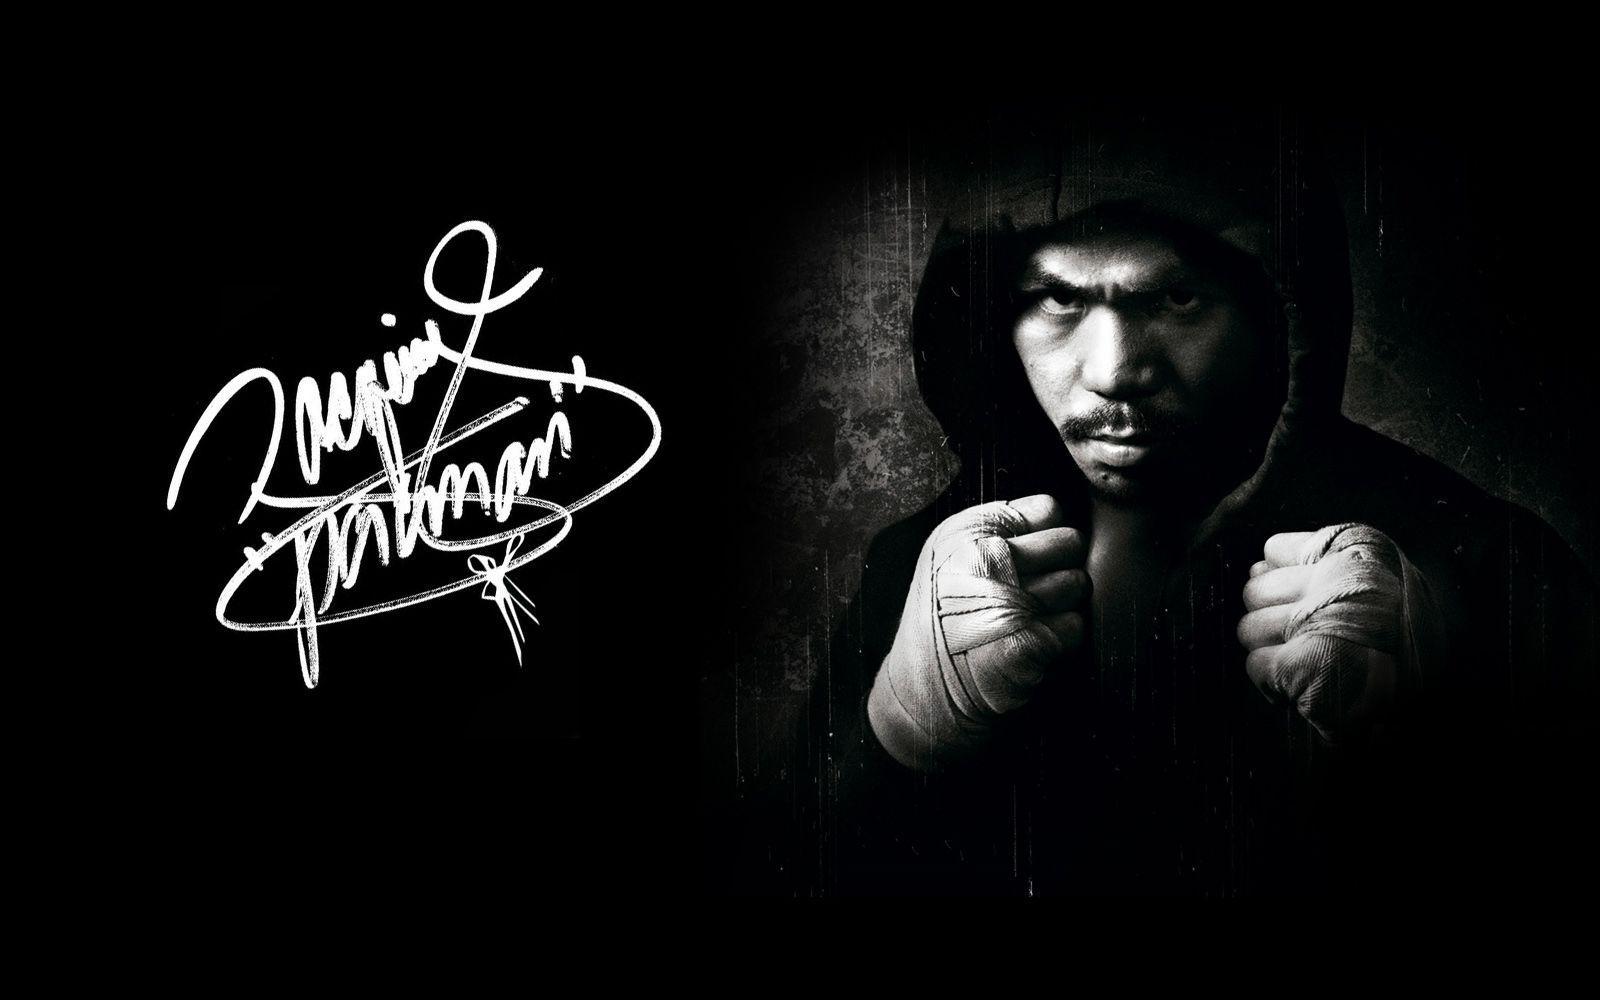 Manny Pacquiao Wallpaper HD Collection For Free Download